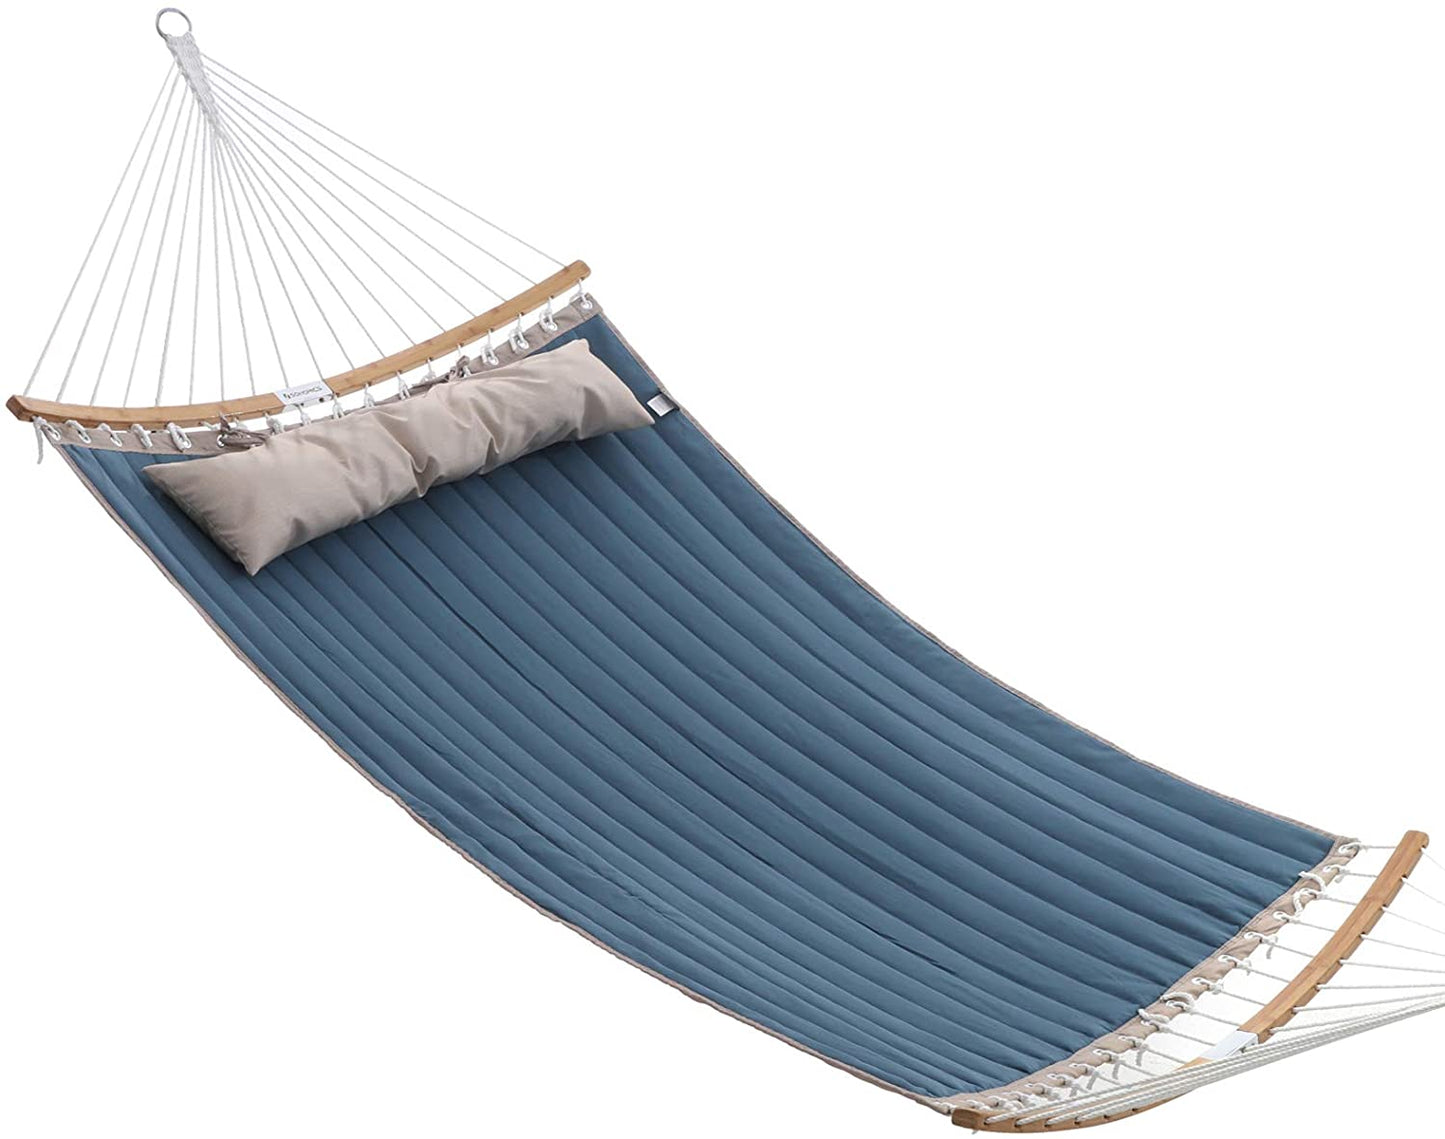 Blue Quilted Double Hammock with Hanging Straps, Detachable Curved Spreader Bars - Home Decor Gifts and More